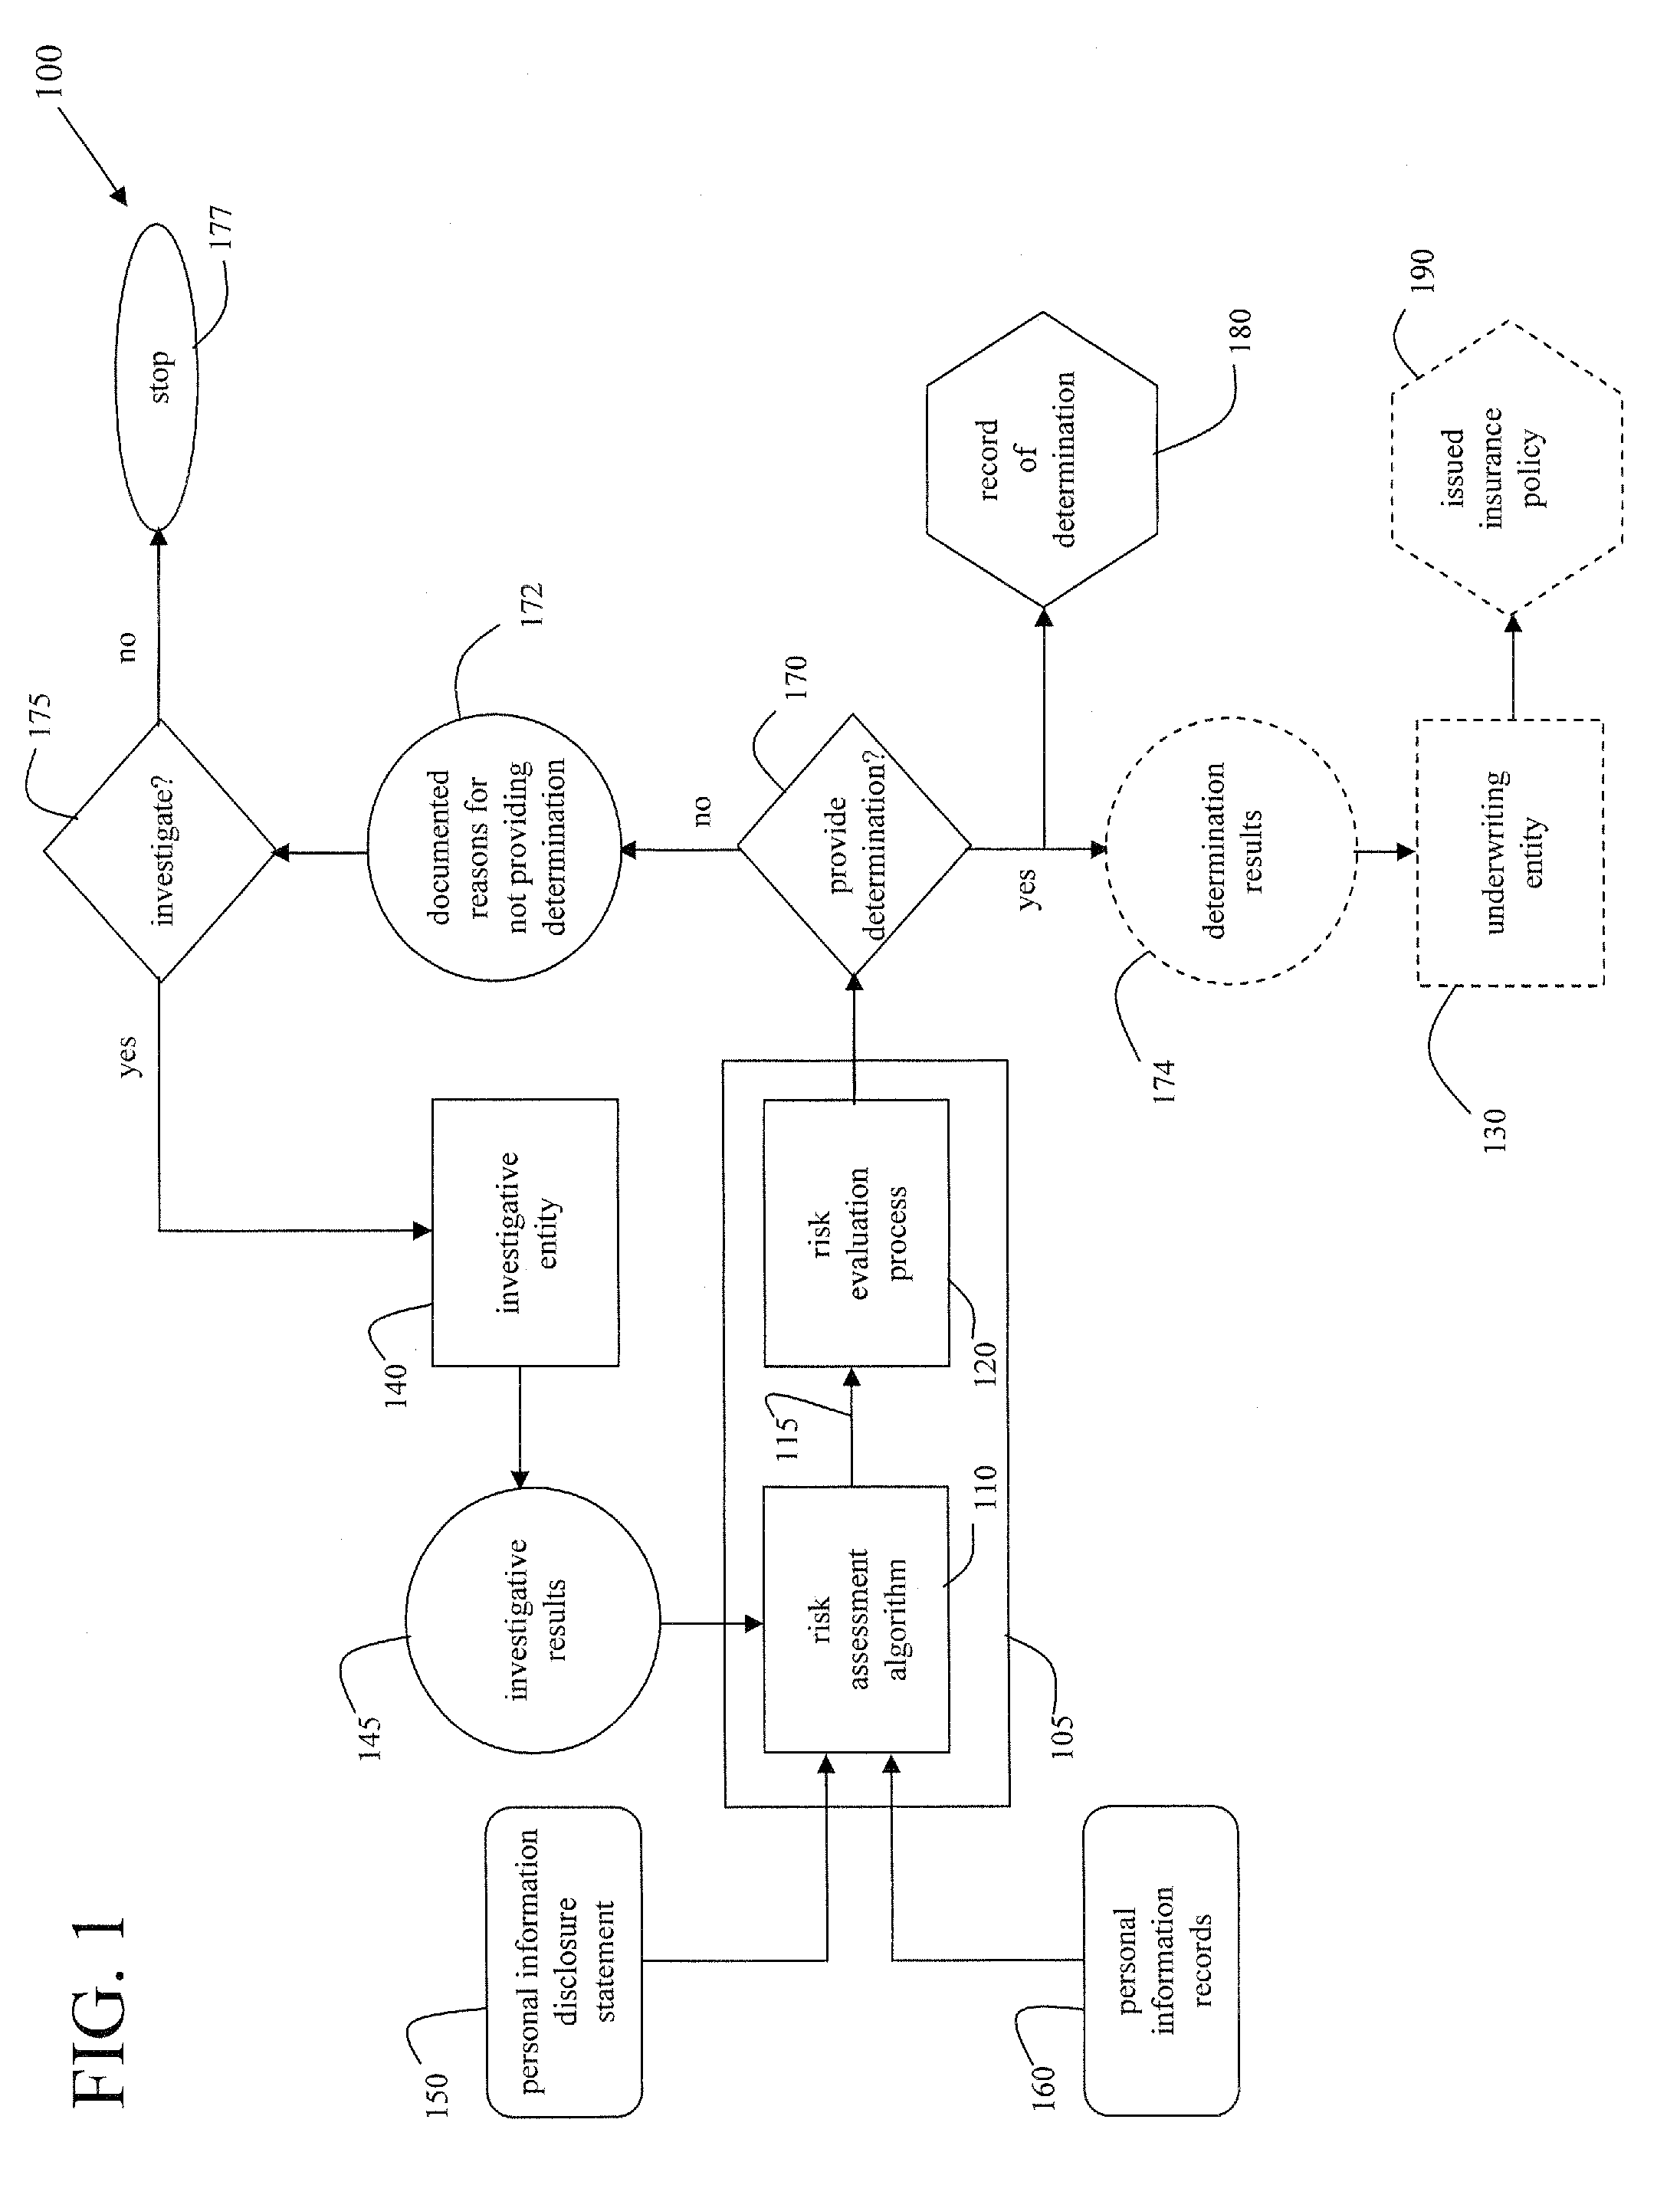 Methods of deterring, detecting, and mitigating fraud by monitoring behaviors and activities of an individual and/or individuals within an organization